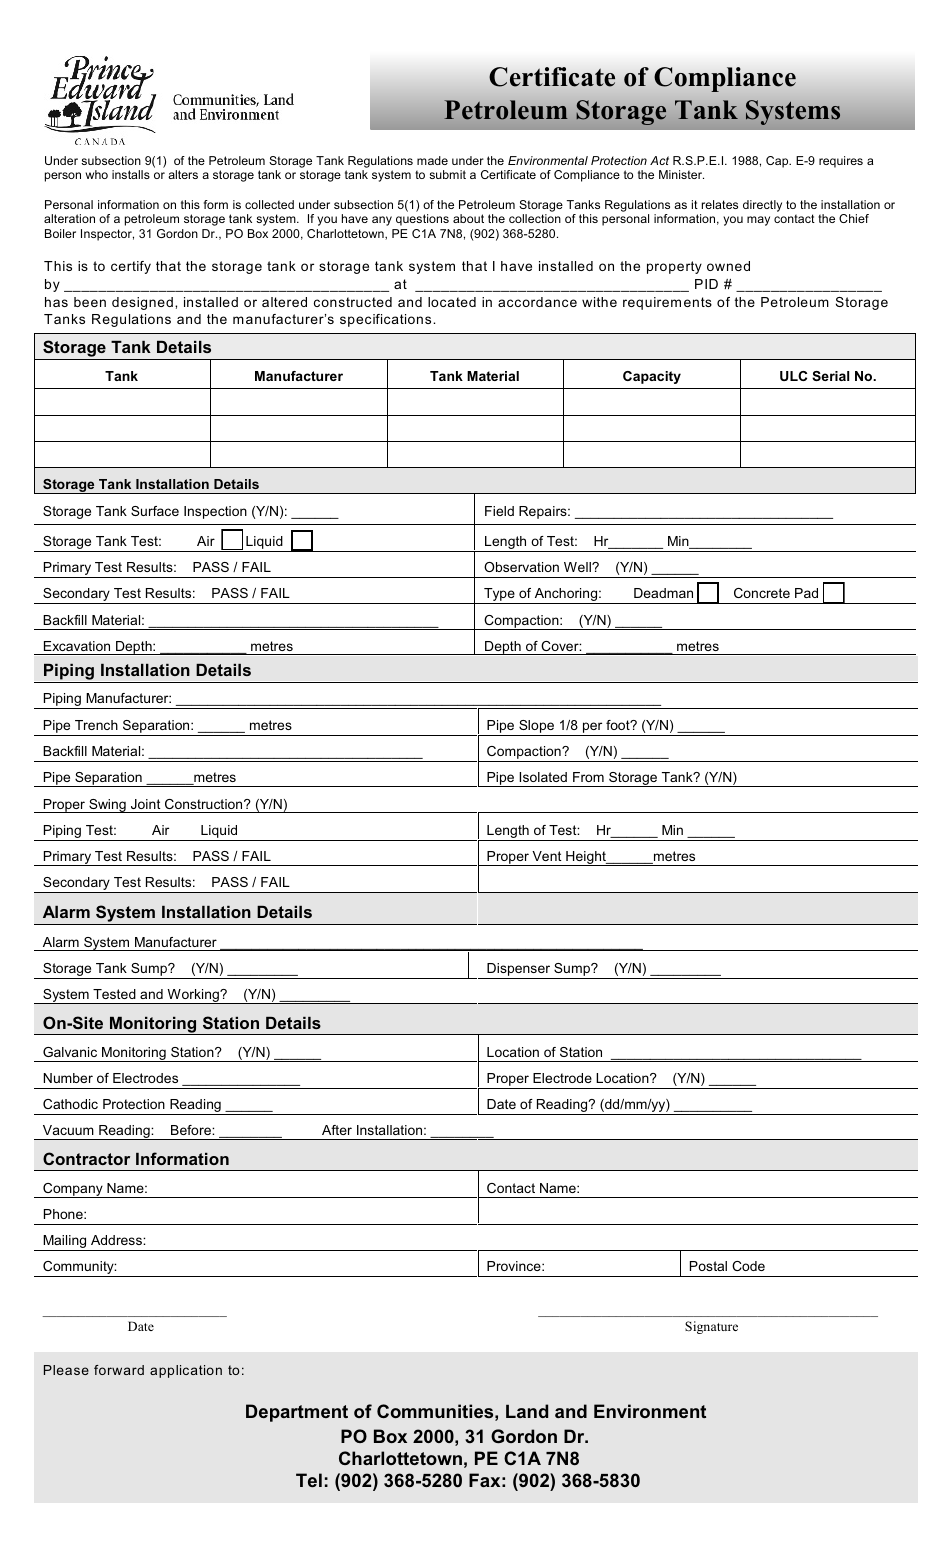 Petroleum Storage Tank Systems Certificate of Compliance - Prince Edward Island, Canada, Page 1